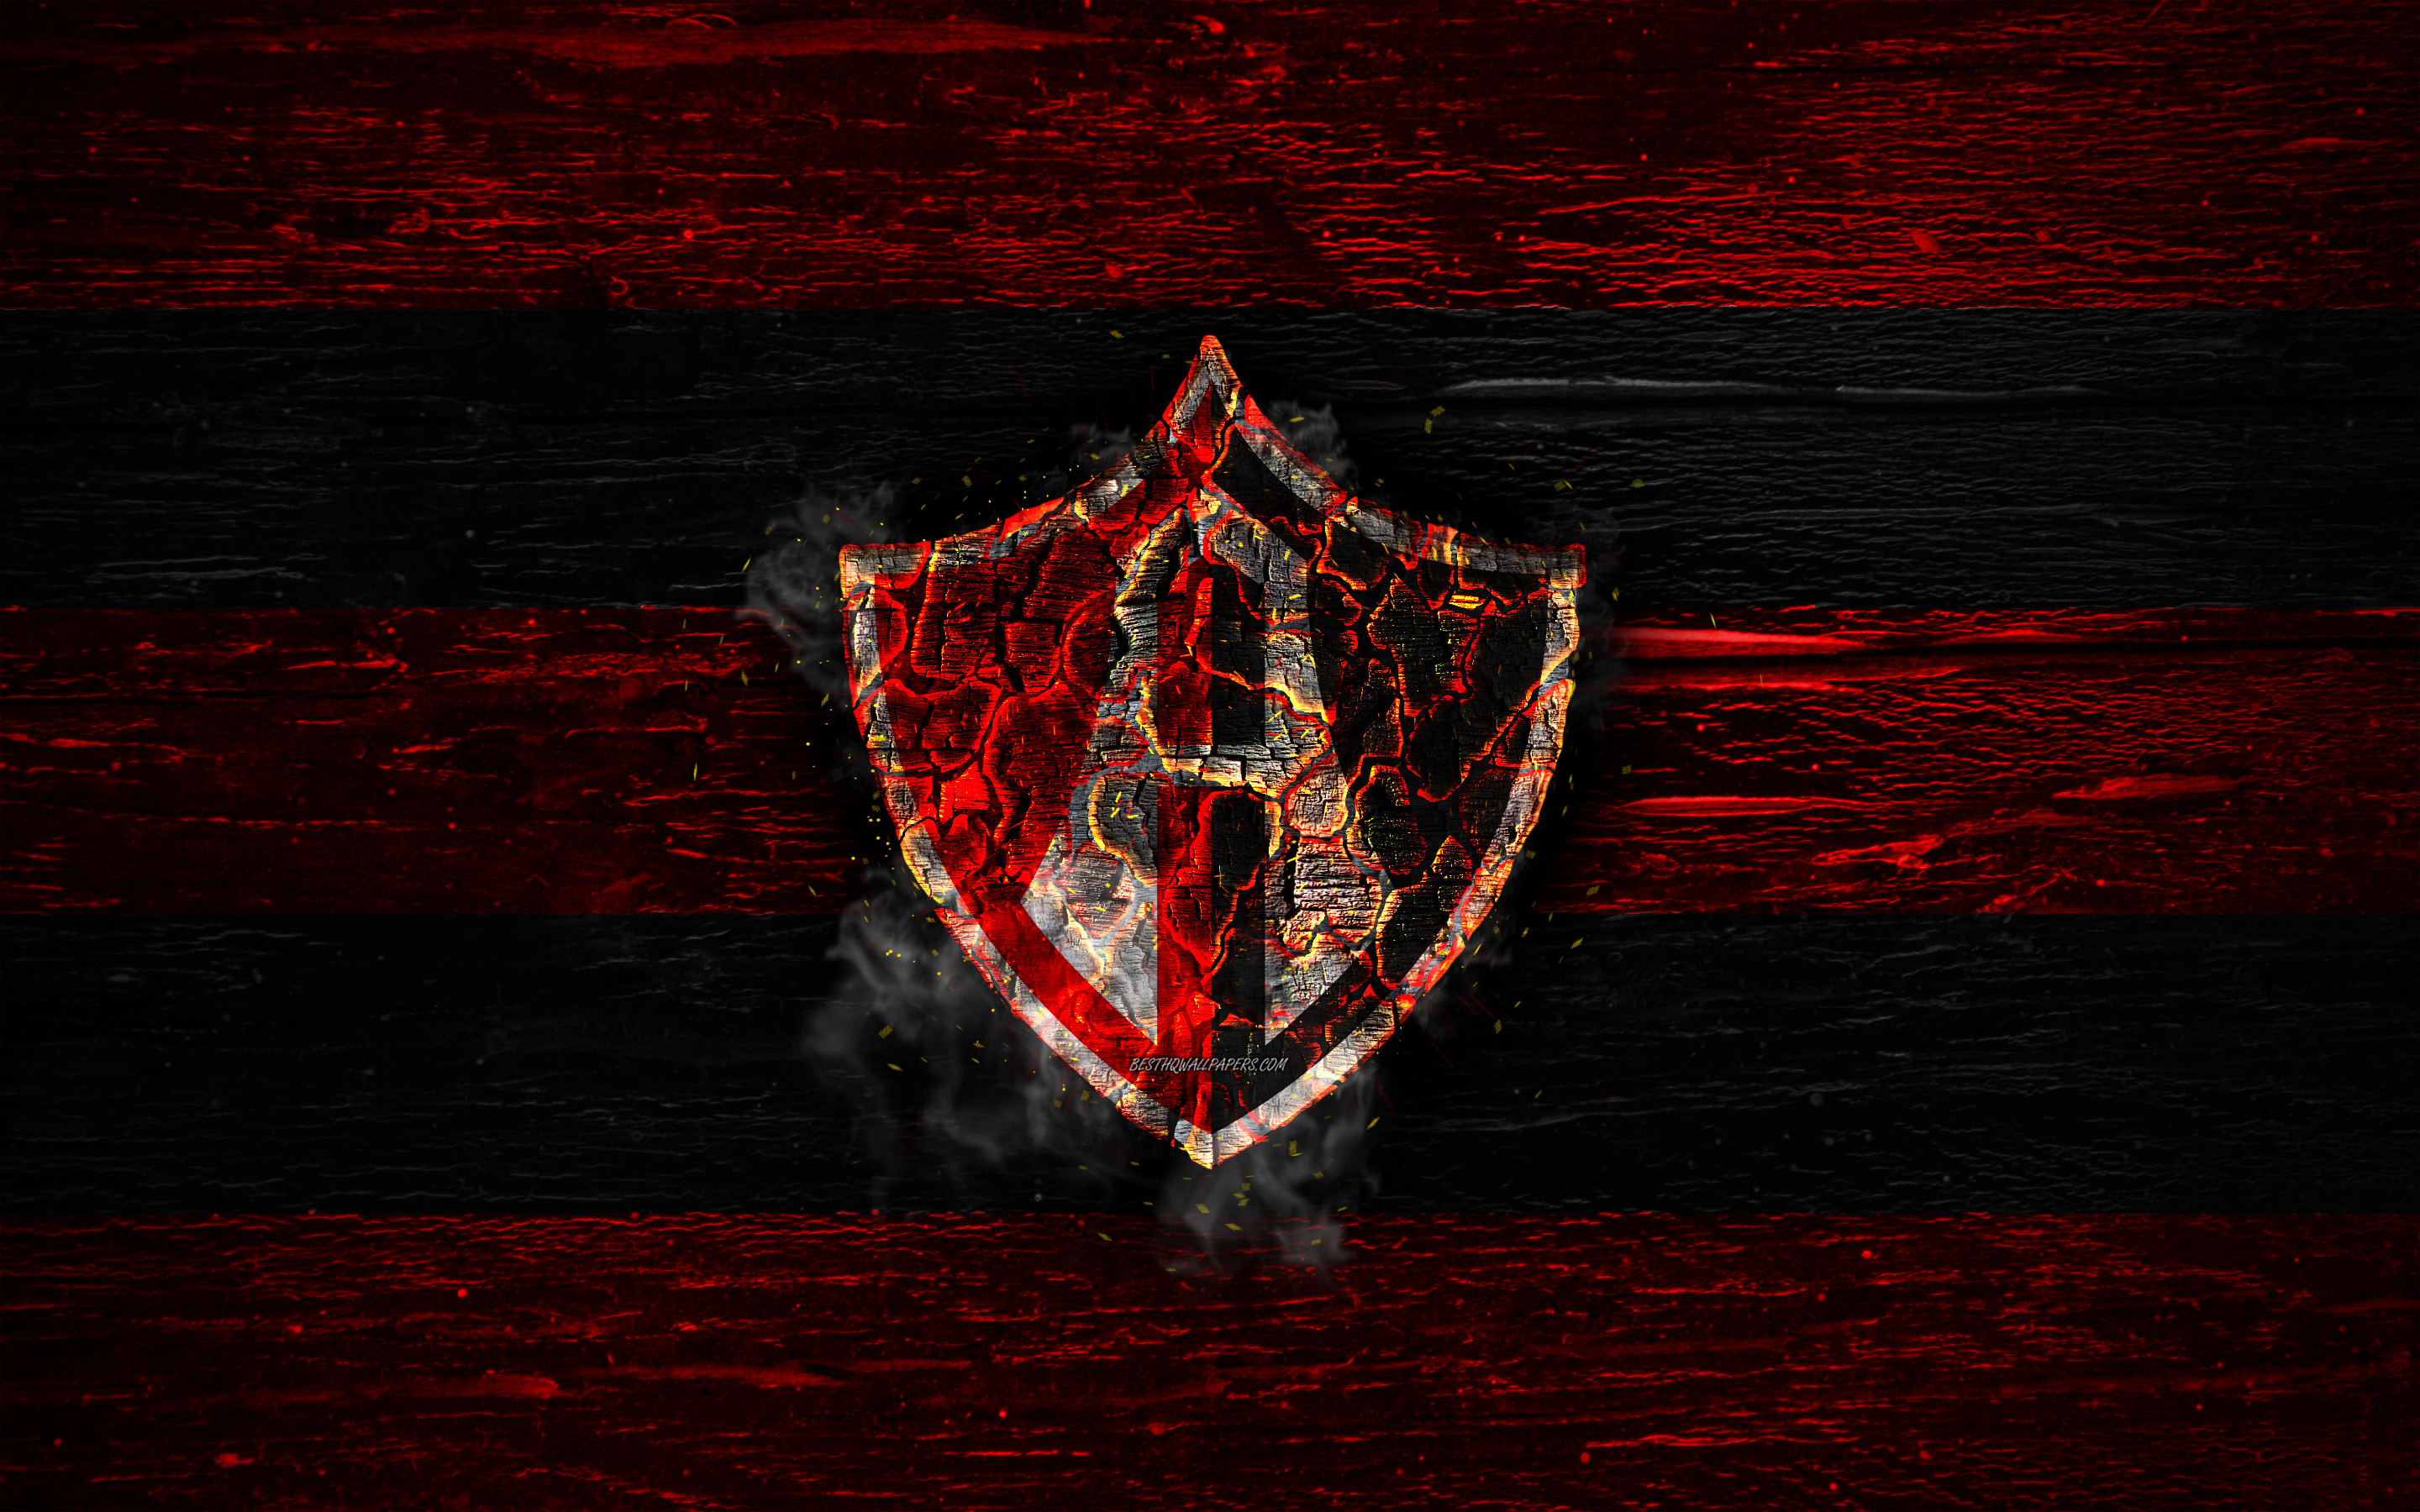 Download wallpaper Atlas FC, fire logo, Liga MX, red and black lines, Mexican football club, Primera Division, grunge, football, soccer, Atlas logo, wooden texture Mexiсo for desktop with resolution 2880x1800. High Quality